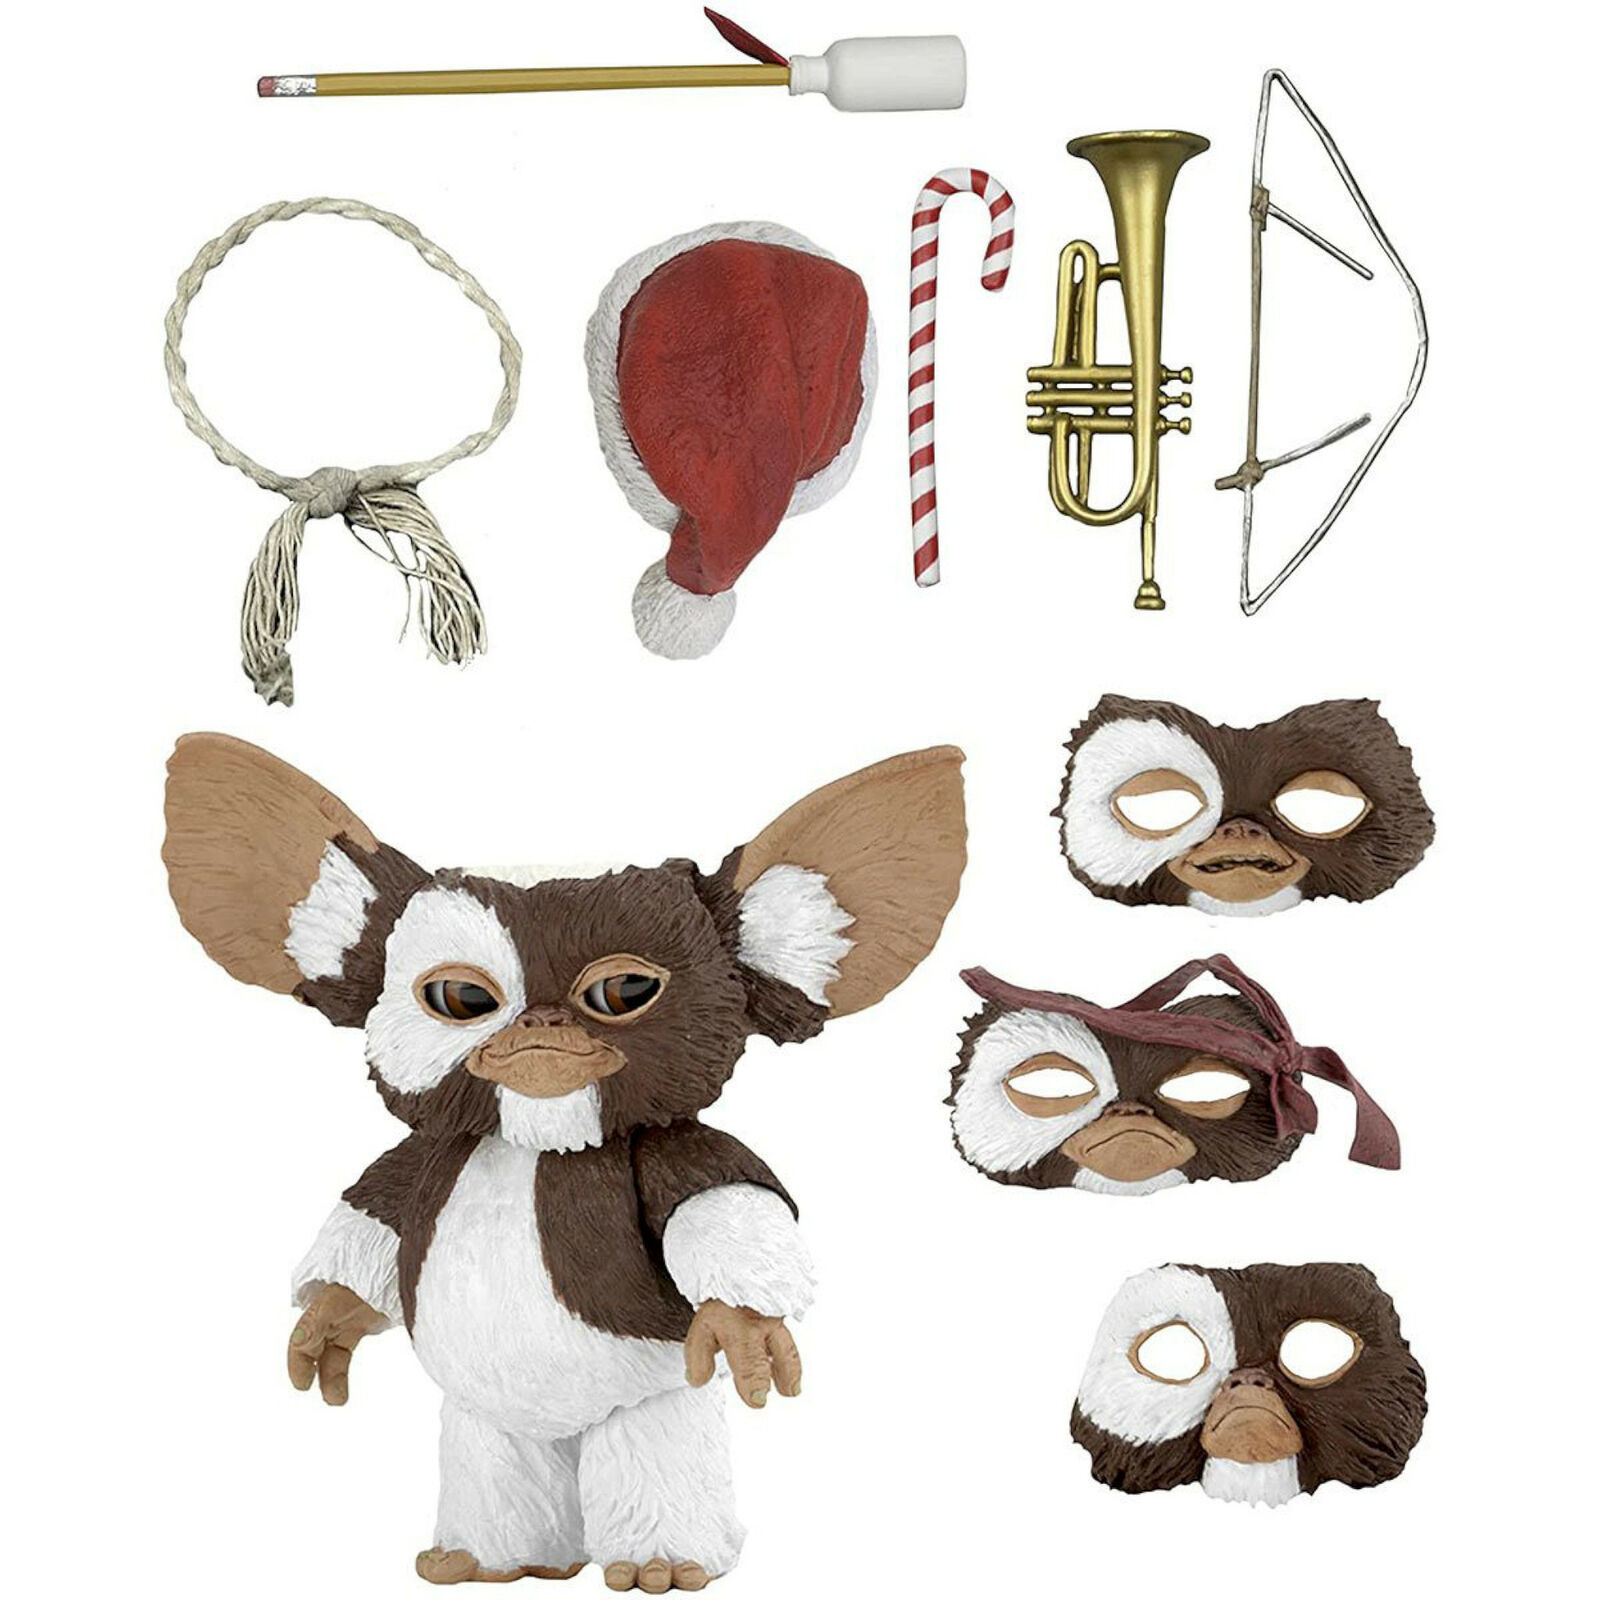 Primary image for NEW NECA 30752 Gremlins Ultimate GIZMO 7-Inch Deluxe Action Figure mogwai